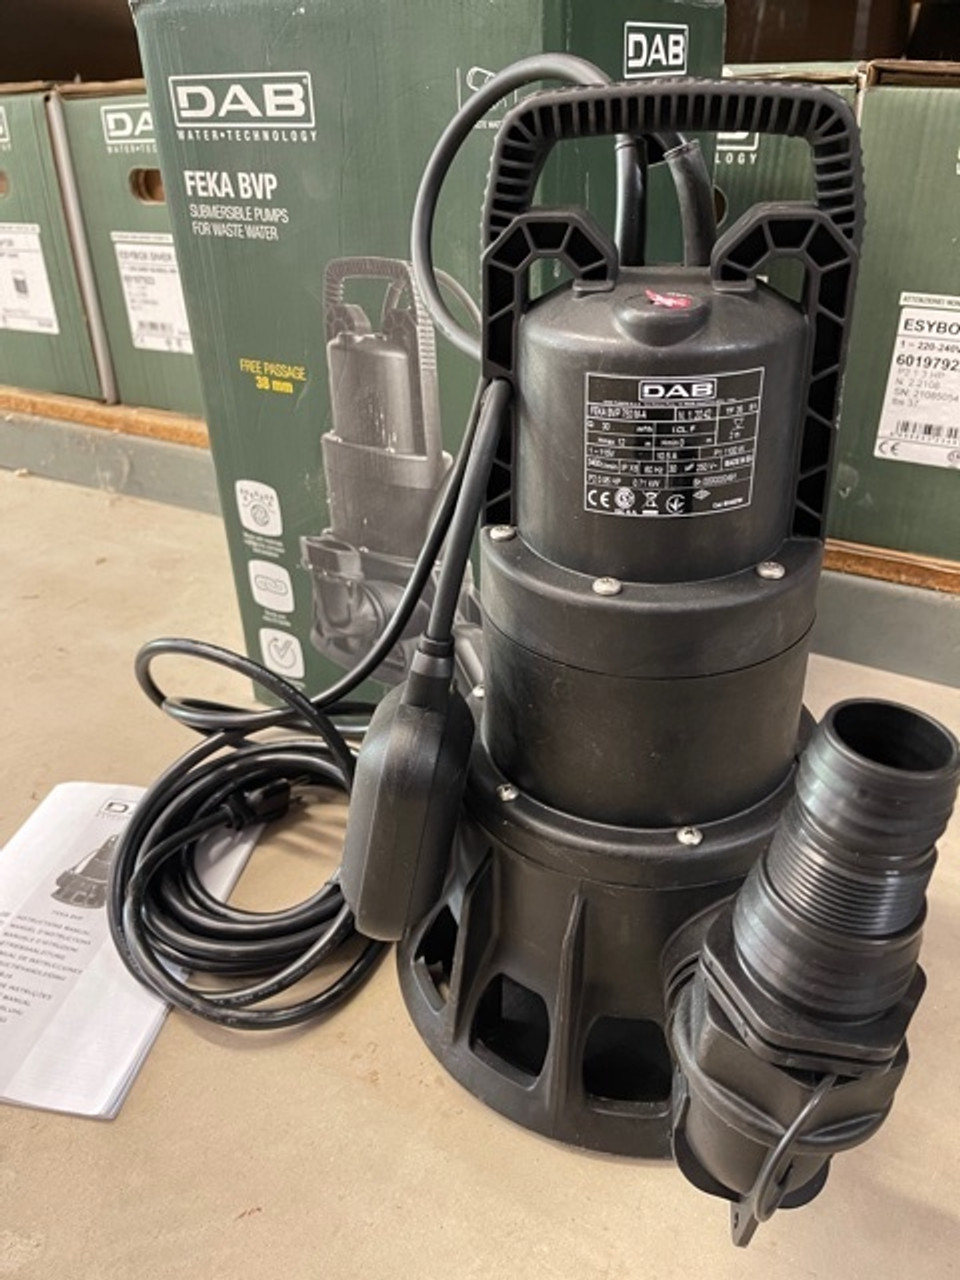 Submersible pump DAB NOVA UP 300 M-AE with electronic float